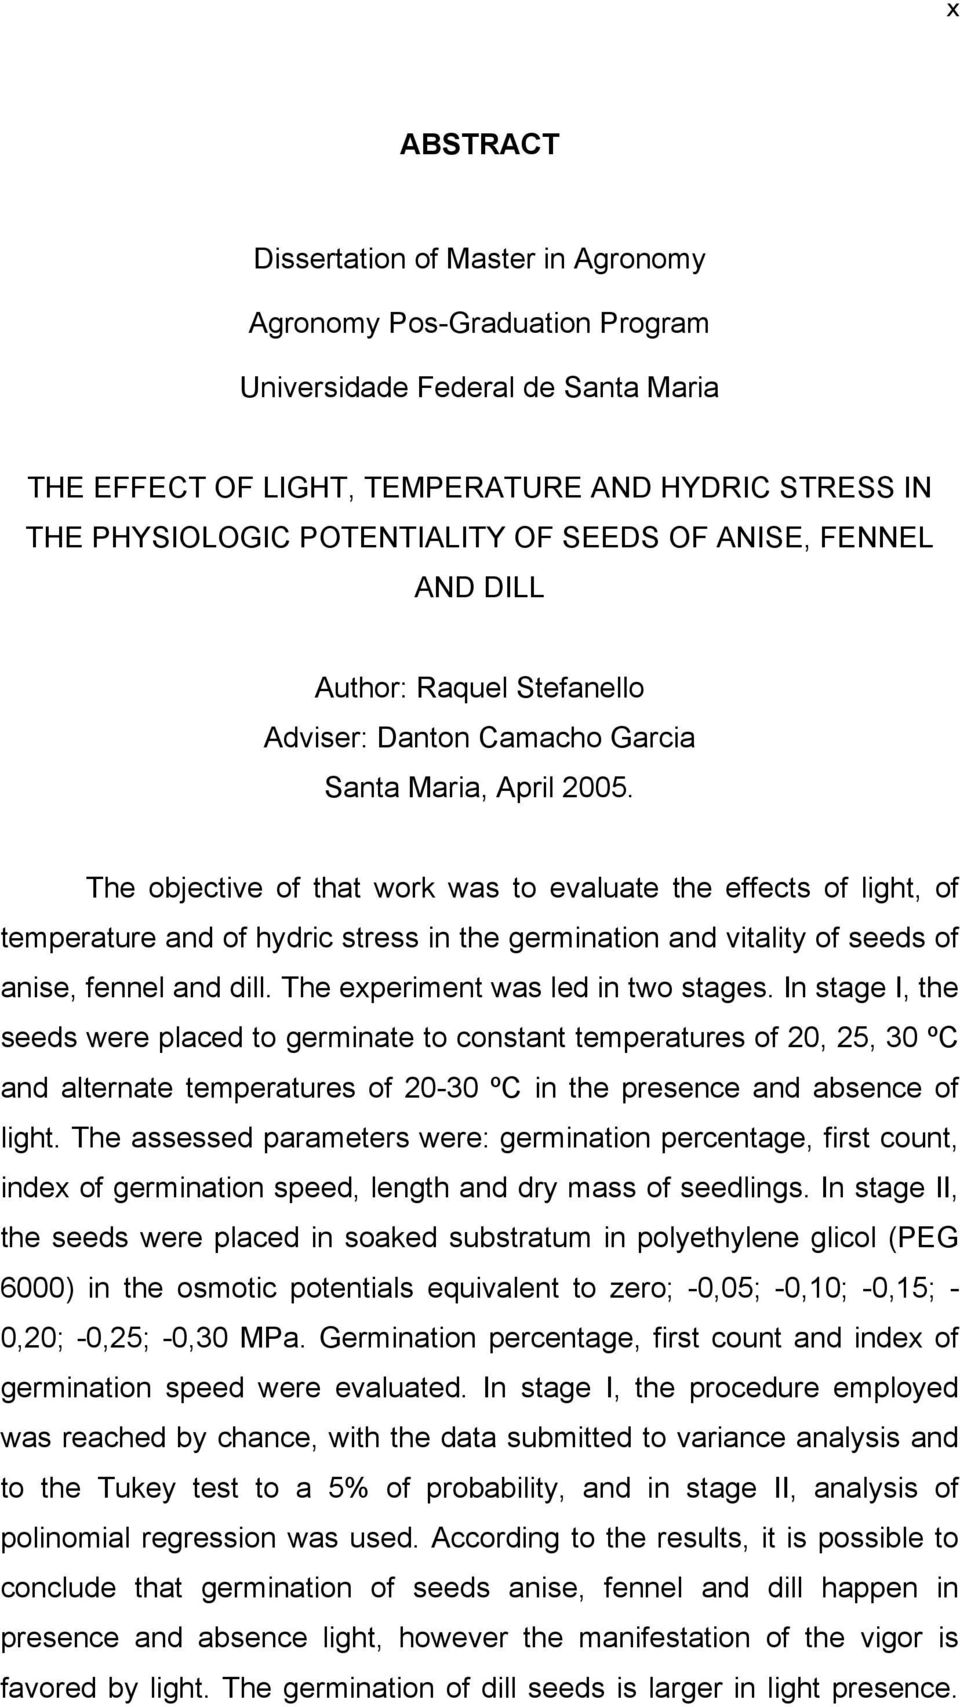 The objective of that work was to evaluate the effects of light, of temperature and of hydric stress in the germination and vitality of seeds of anise, fennel and dill.